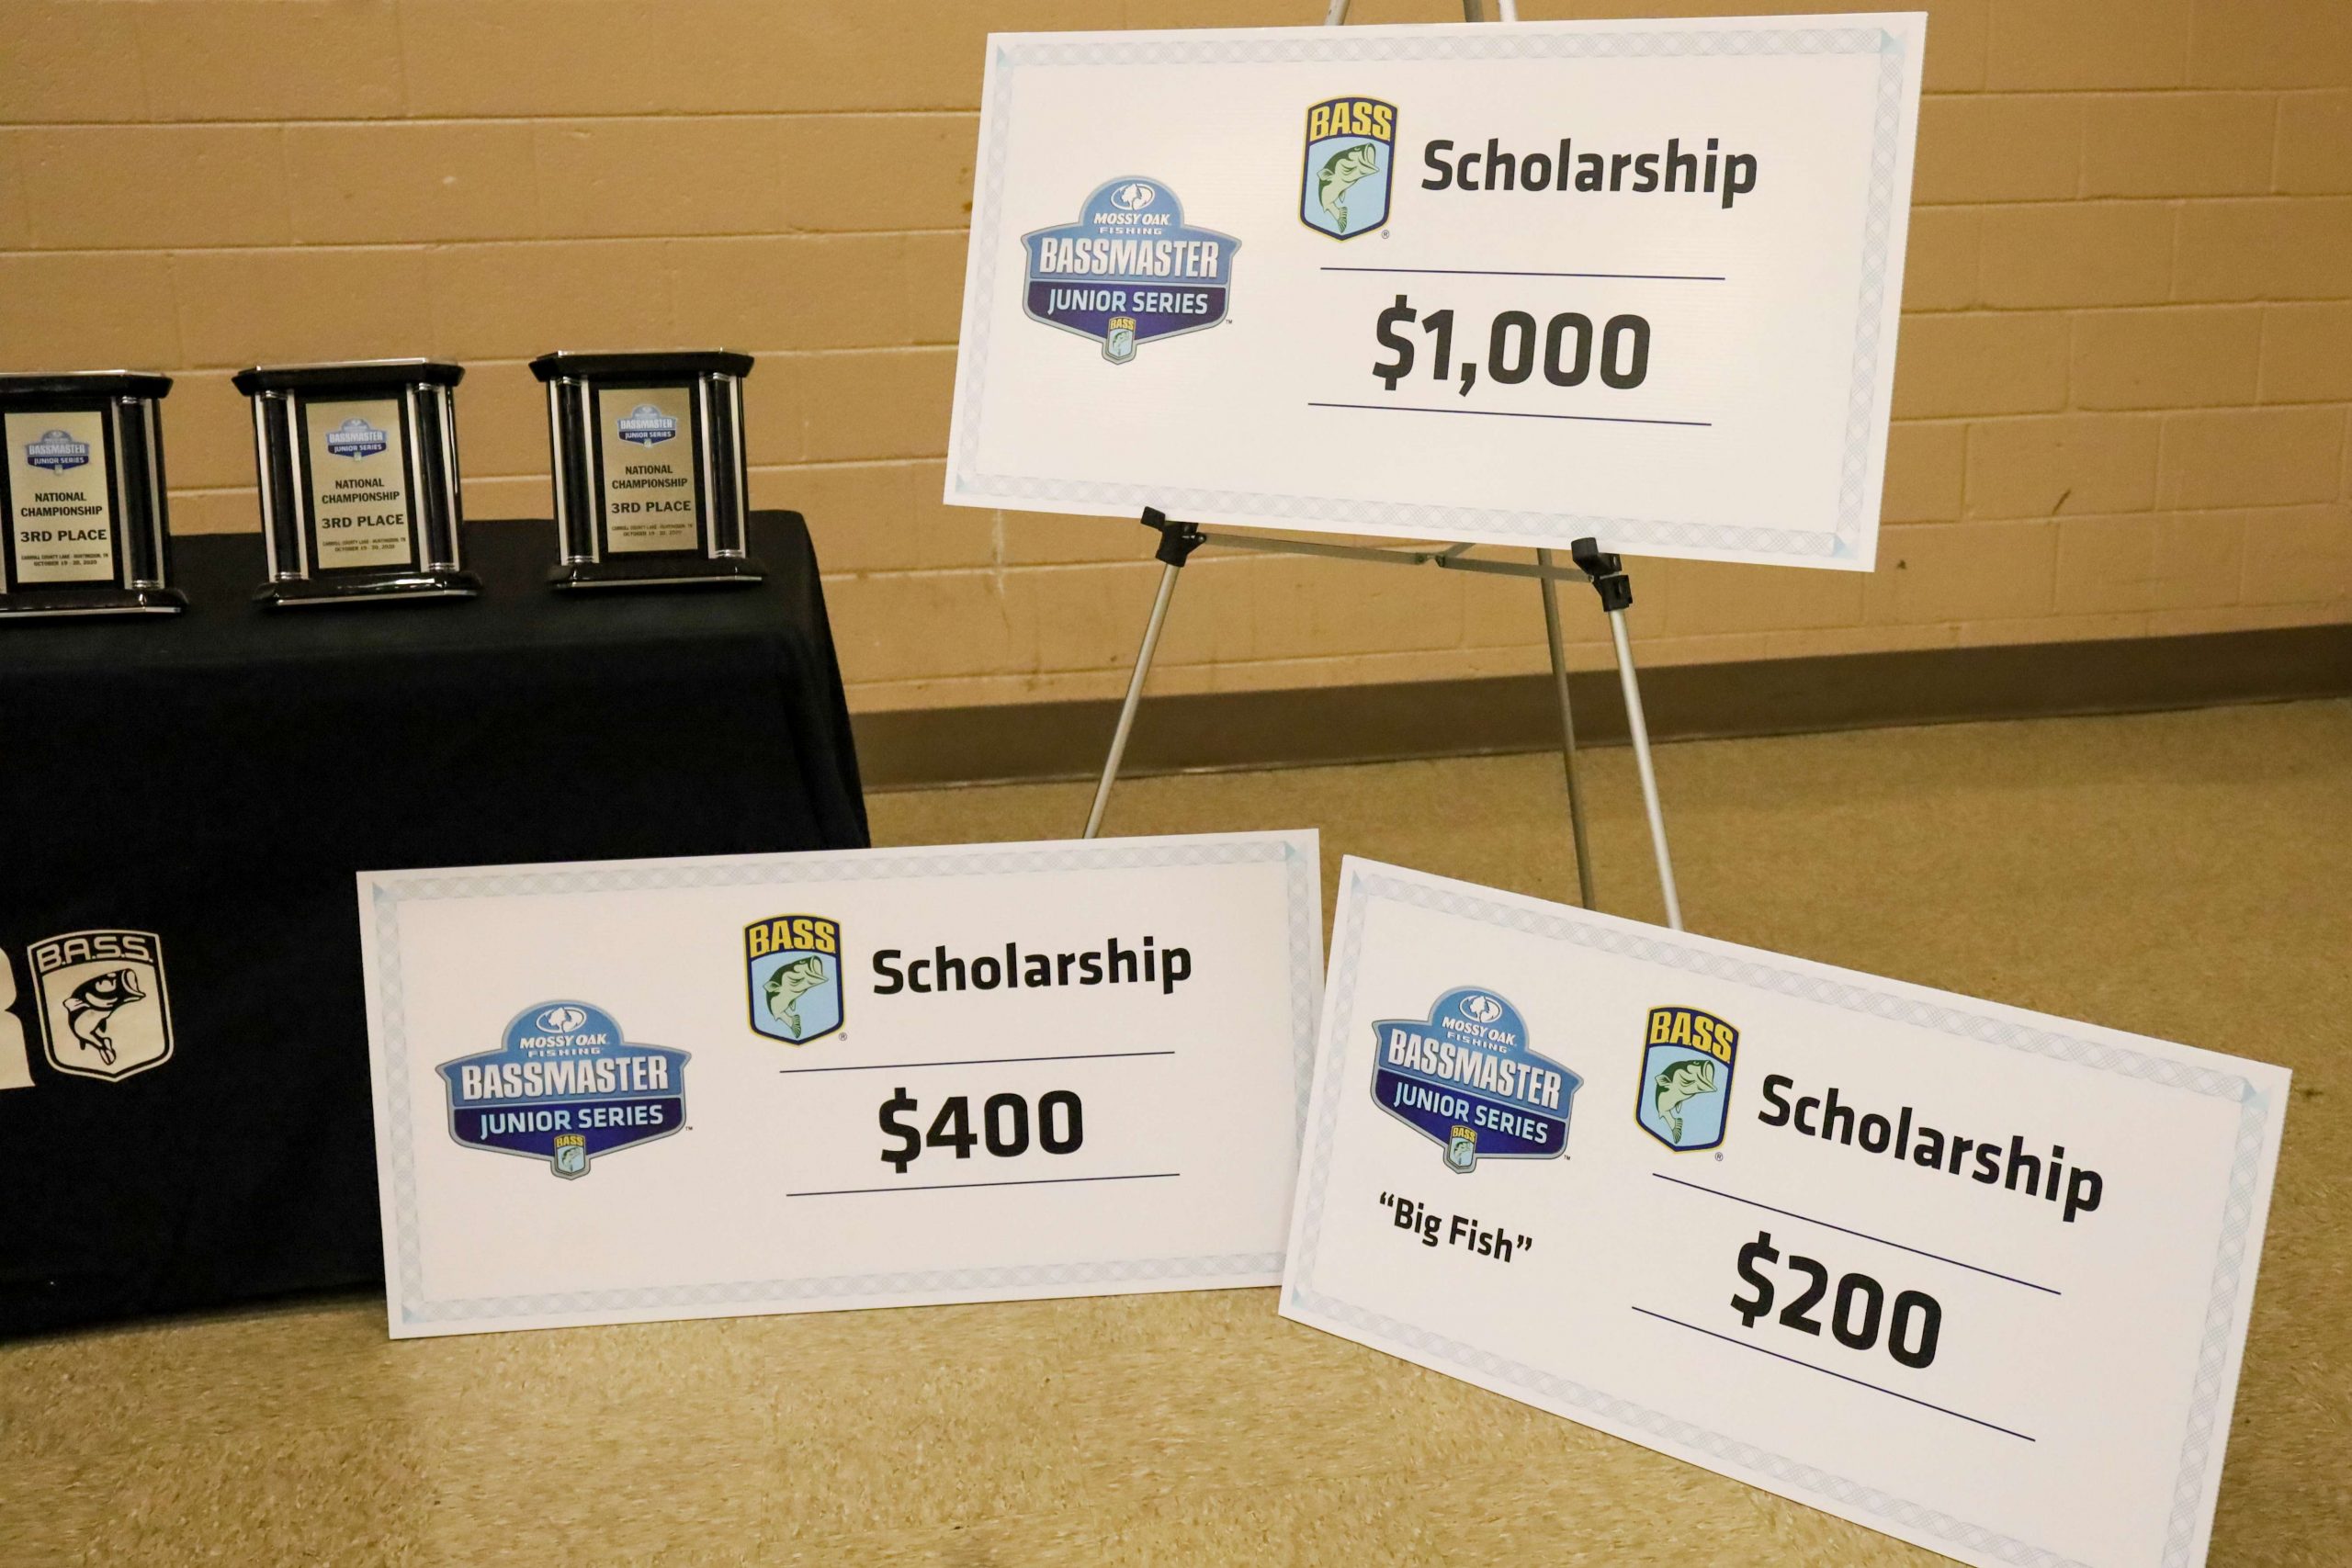 Not only are there trophies given to the winning teams, but a lot of scholarship money will be awarded too.